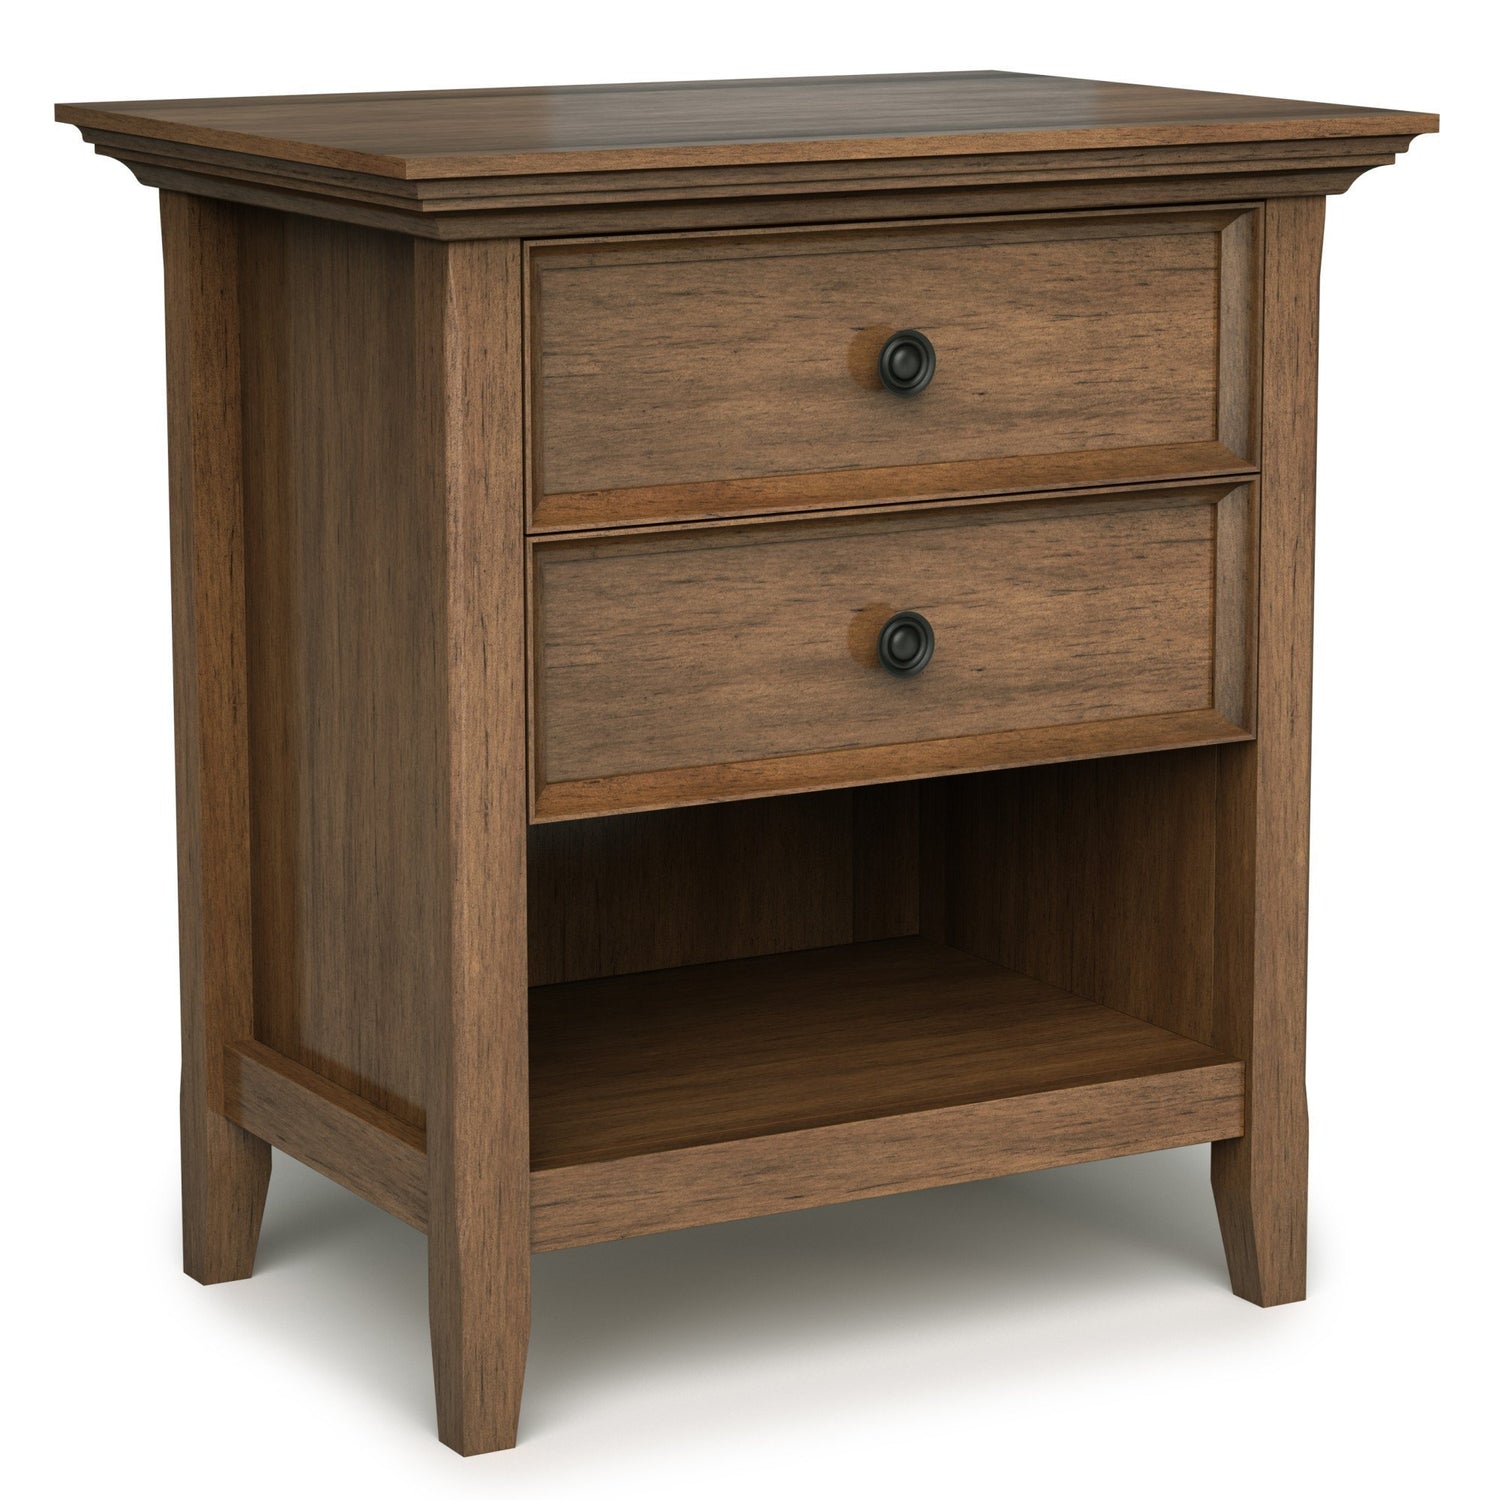 Rustic Natural Aged Brown | Amherst Bedside Table